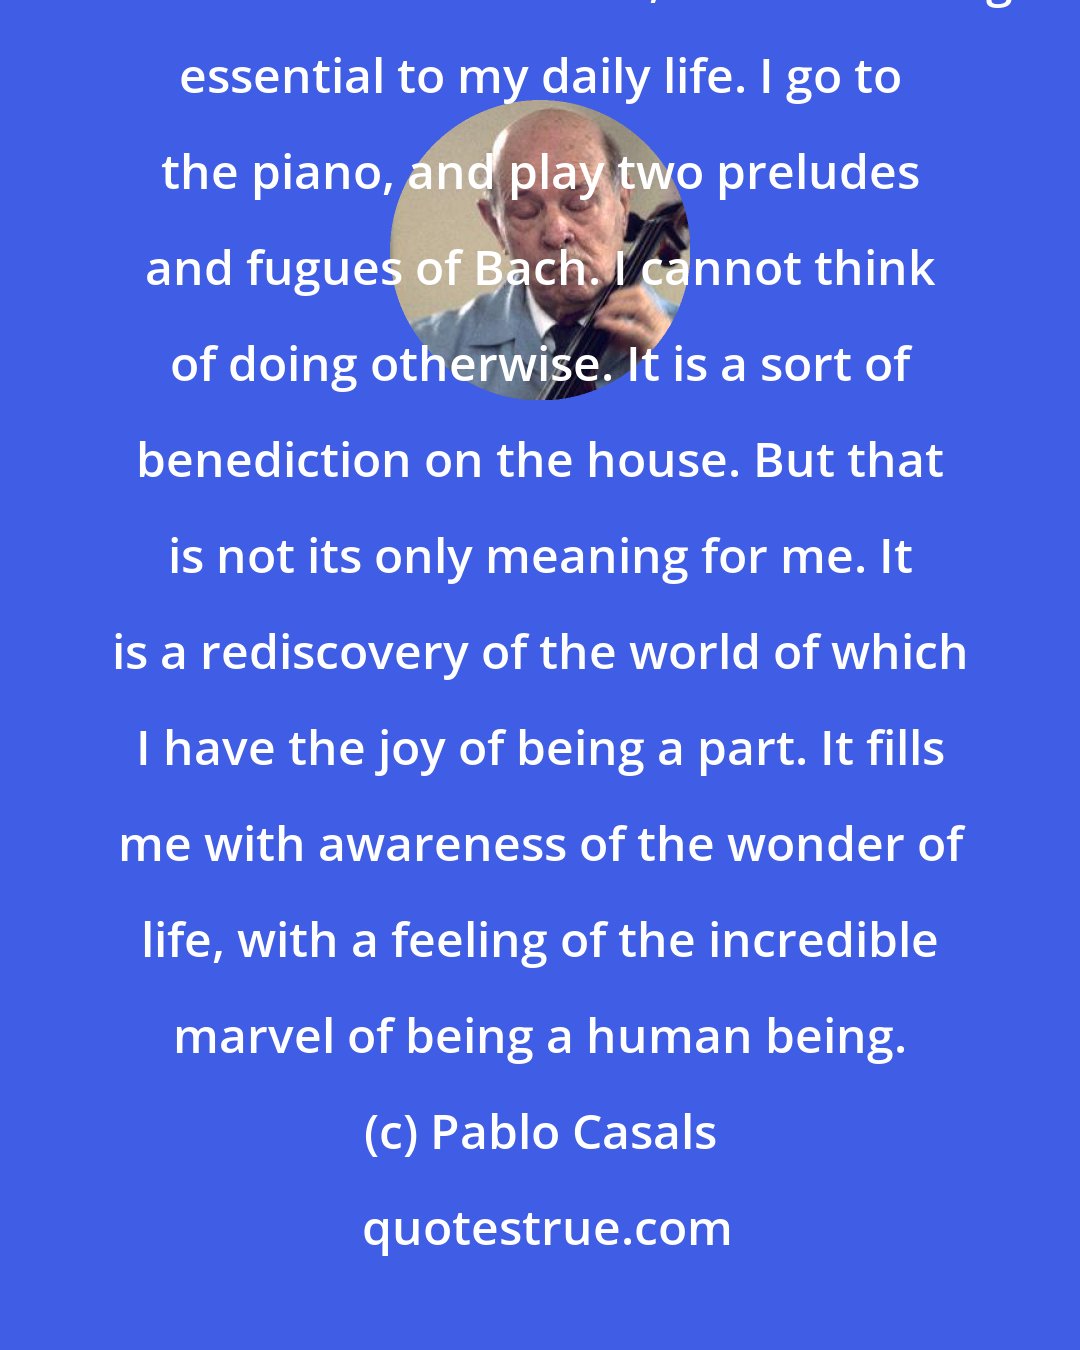 Pablo Casals: For the past eighty years I have started each day in the same manner. It is not a mechanical routine, but something essential to my daily life. I go to the piano, and play two preludes and fugues of Bach. I cannot think of doing otherwise. It is a sort of benediction on the house. But that is not its only meaning for me. It is a rediscovery of the world of which I have the joy of being a part. It fills me with awareness of the wonder of life, with a feeling of the incredible marvel of being a human being.